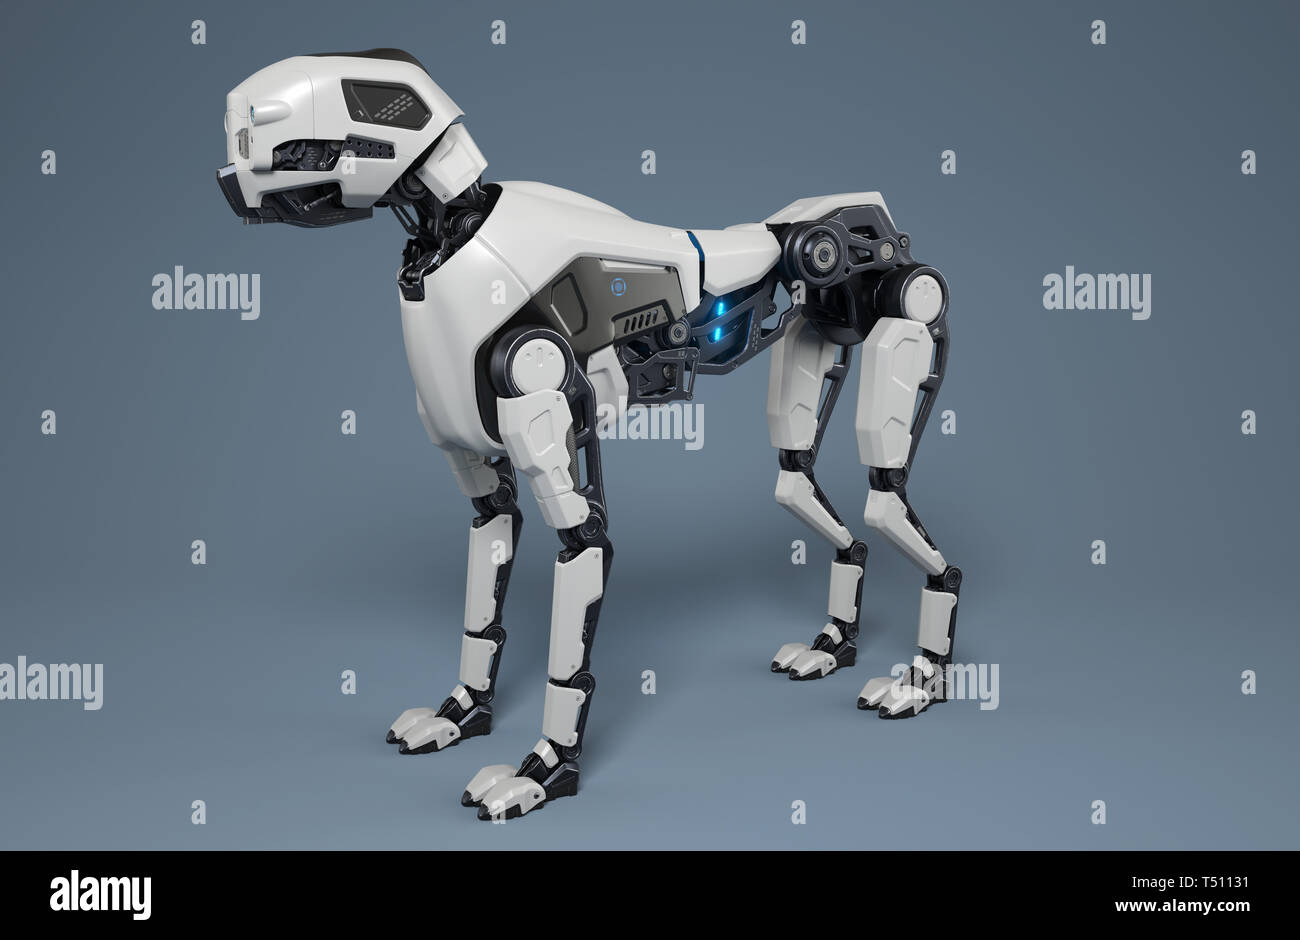 Robot Dog High Resolution Stock Photography and Images - Alamy